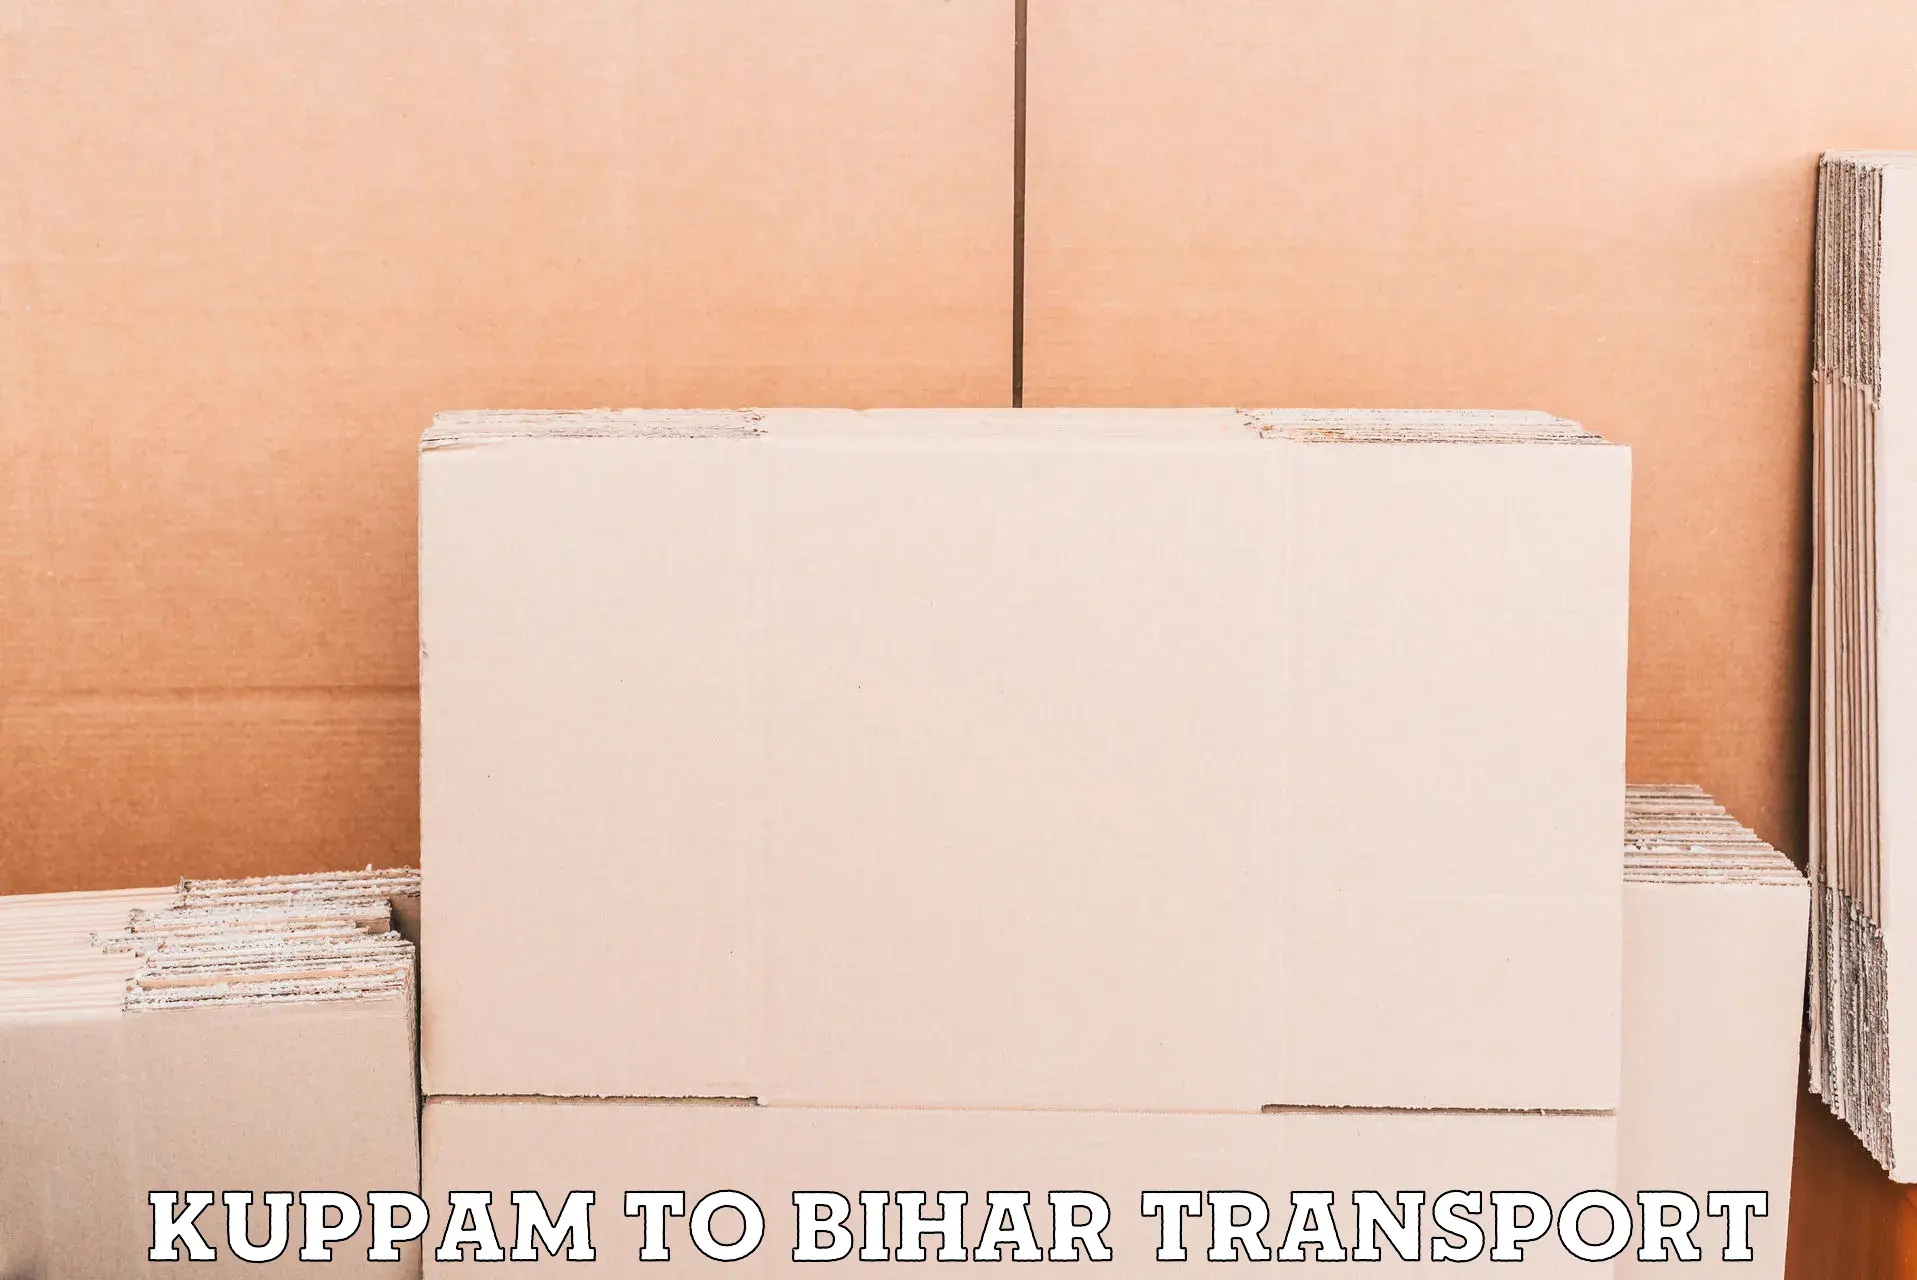 Container transport service Kuppam to Buxar